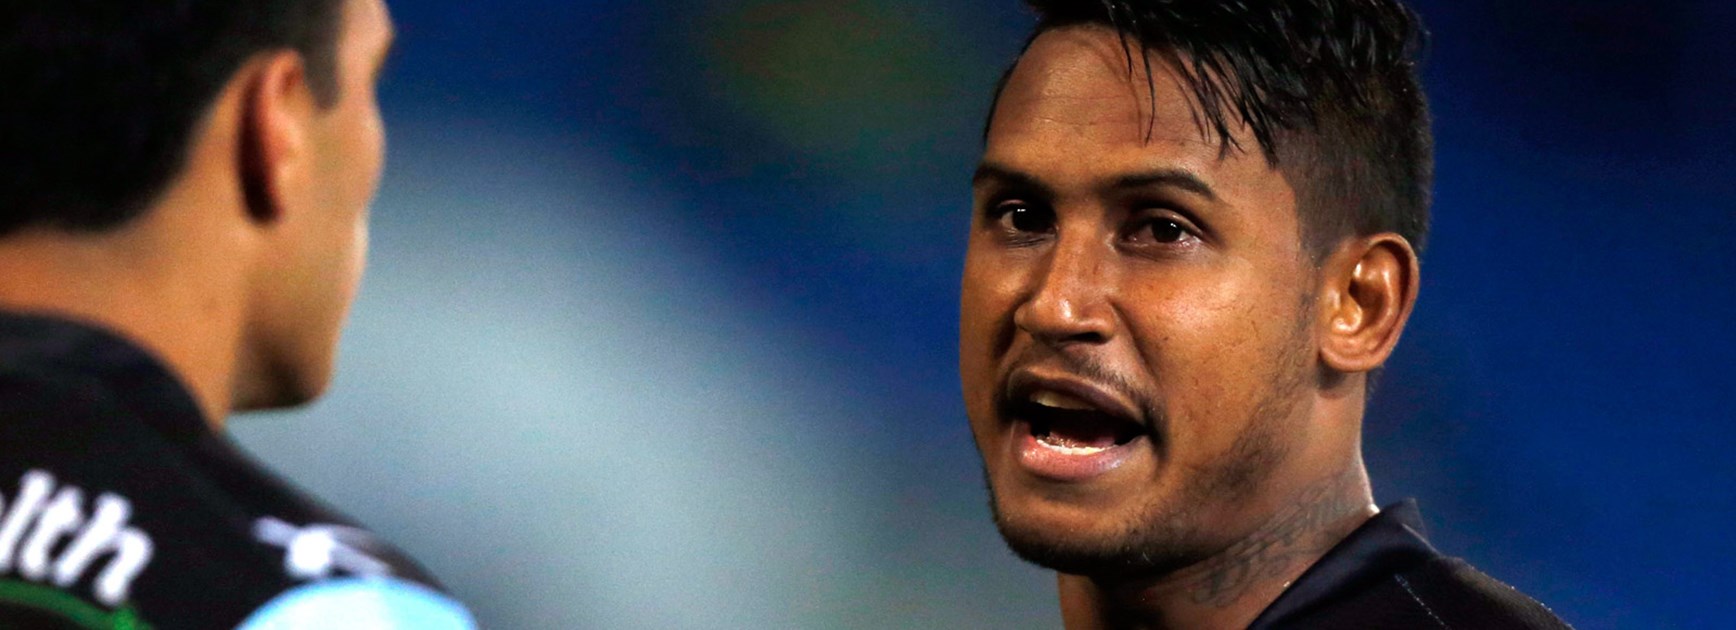 Sharks fullback Ben Barba is proud the club are supporting the RECOGNISE campaign in Indigenous Round.